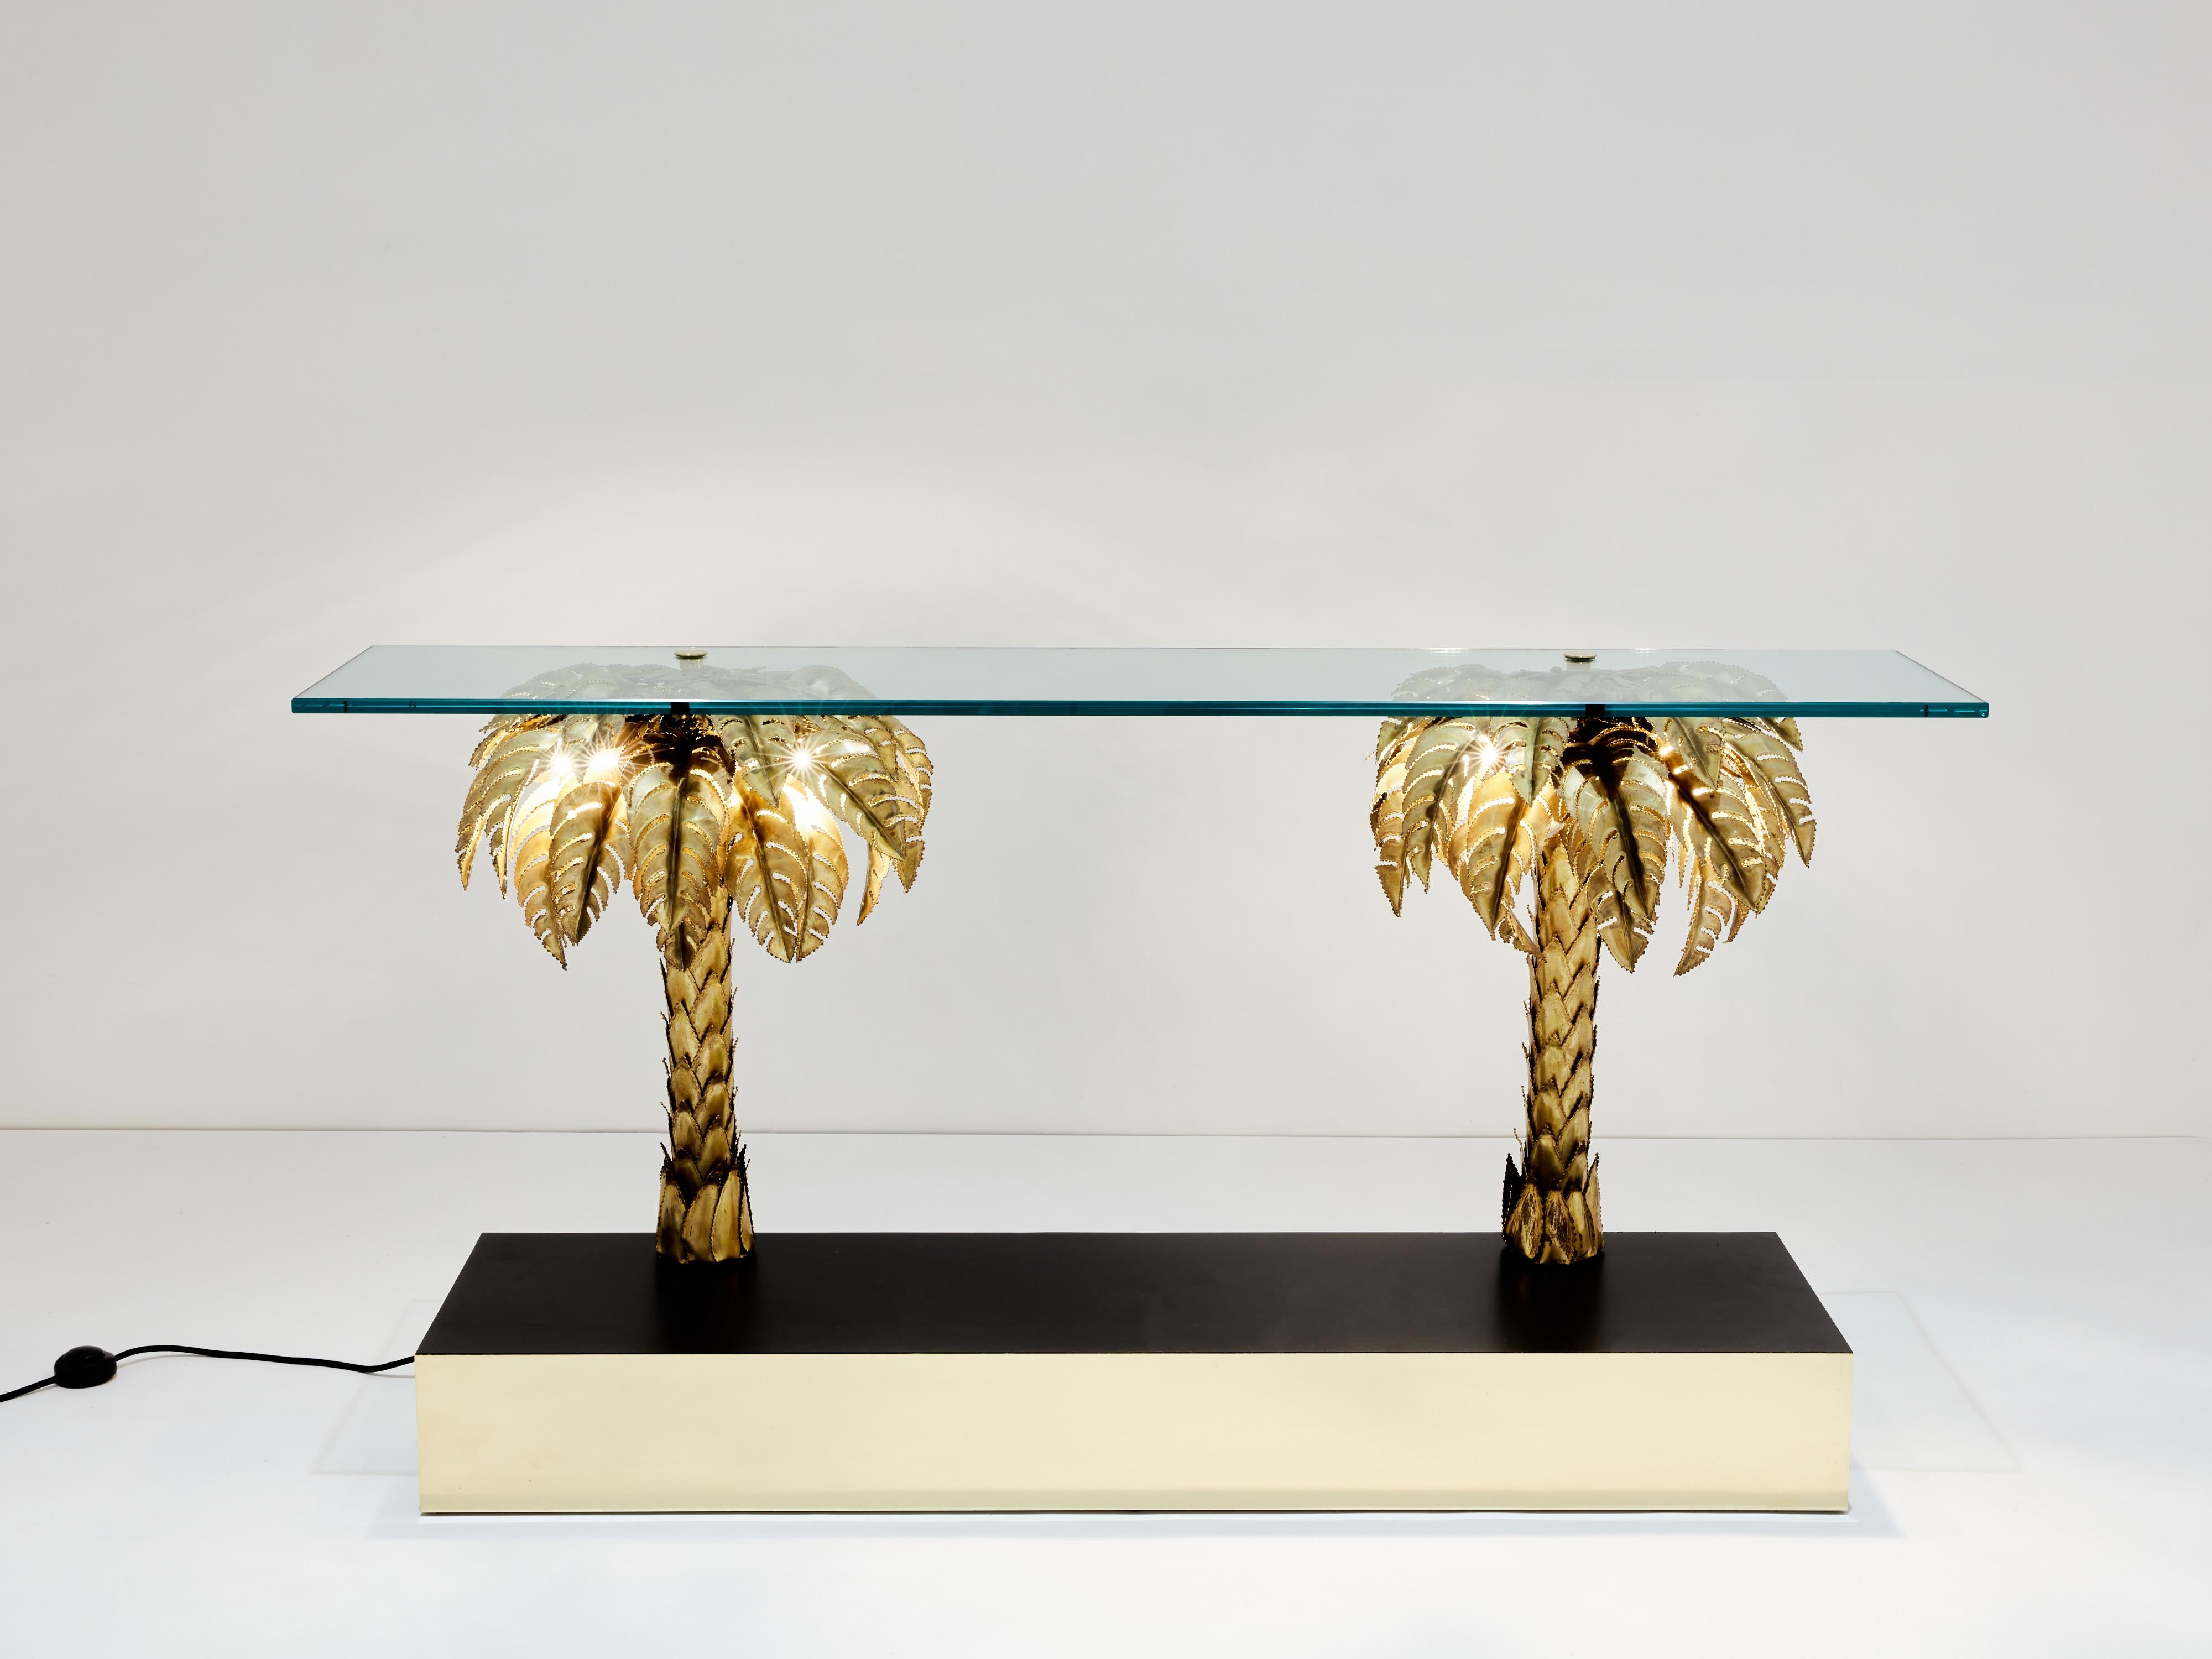 These palm tree sculptures are probably the most iconic pieces by French design firm Maison Jansen in the 1970s. This very rare example is made of two large palm trees sitting on a black wood and polished brass base, and topped with a transparent